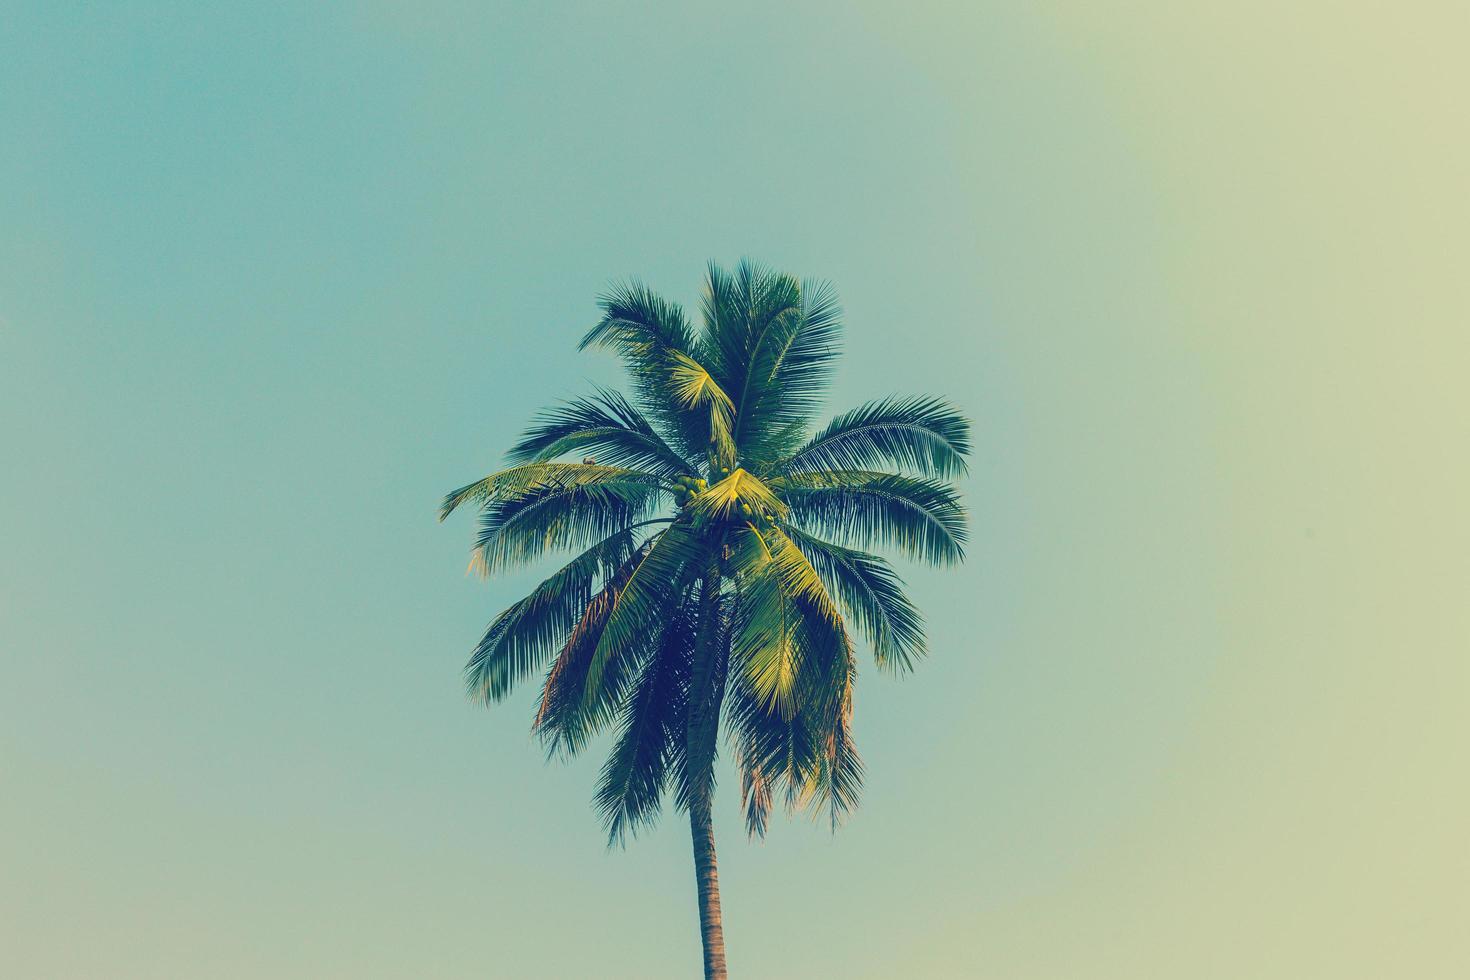 Coconut palm tree with vintage effect. photo